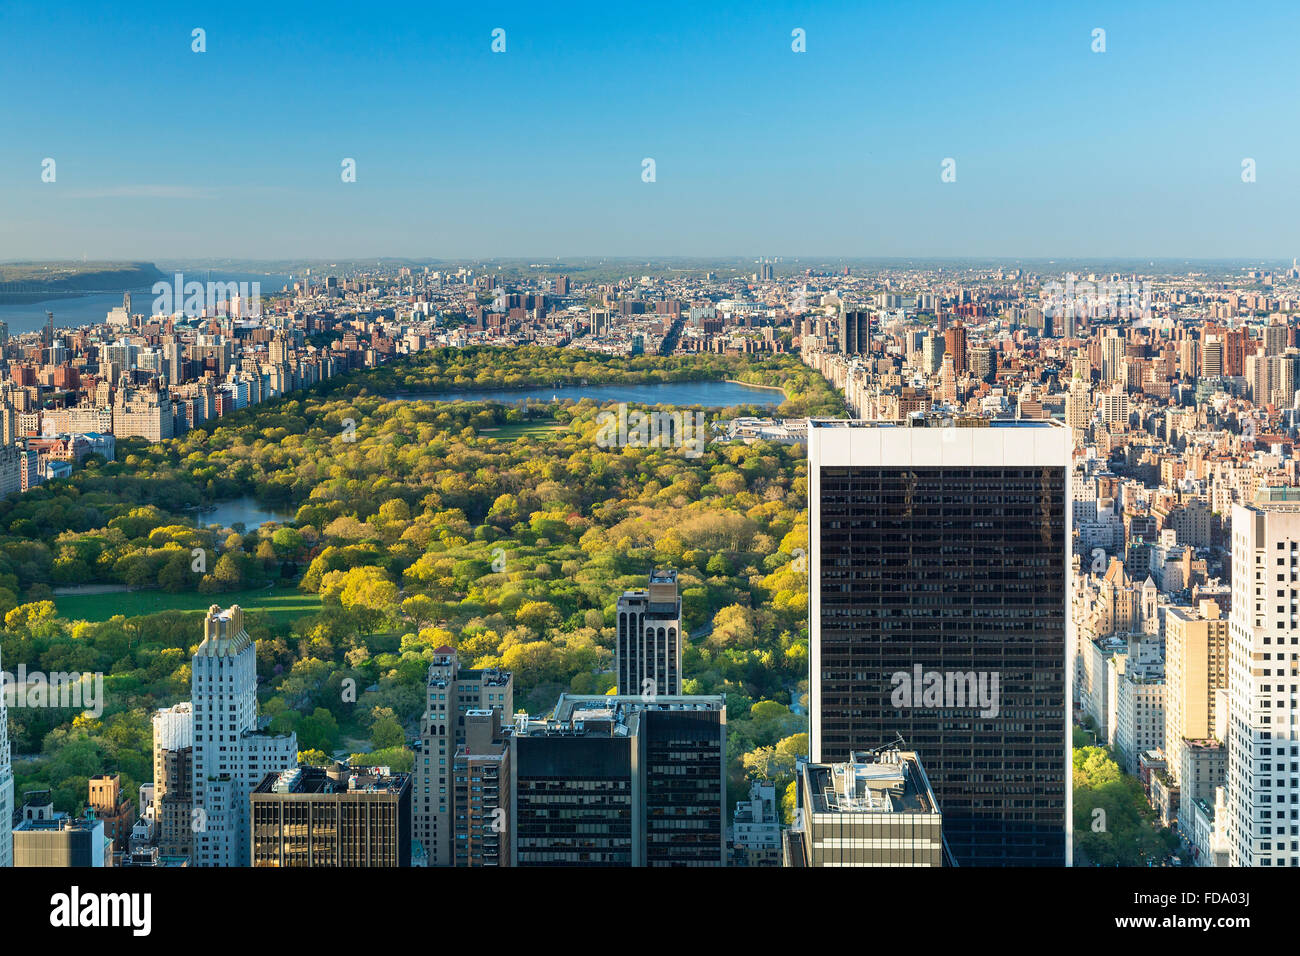 New york city skyline with central park, View from the Rockefeller Center viewing platform 'Top of the Rock' Stock Photo